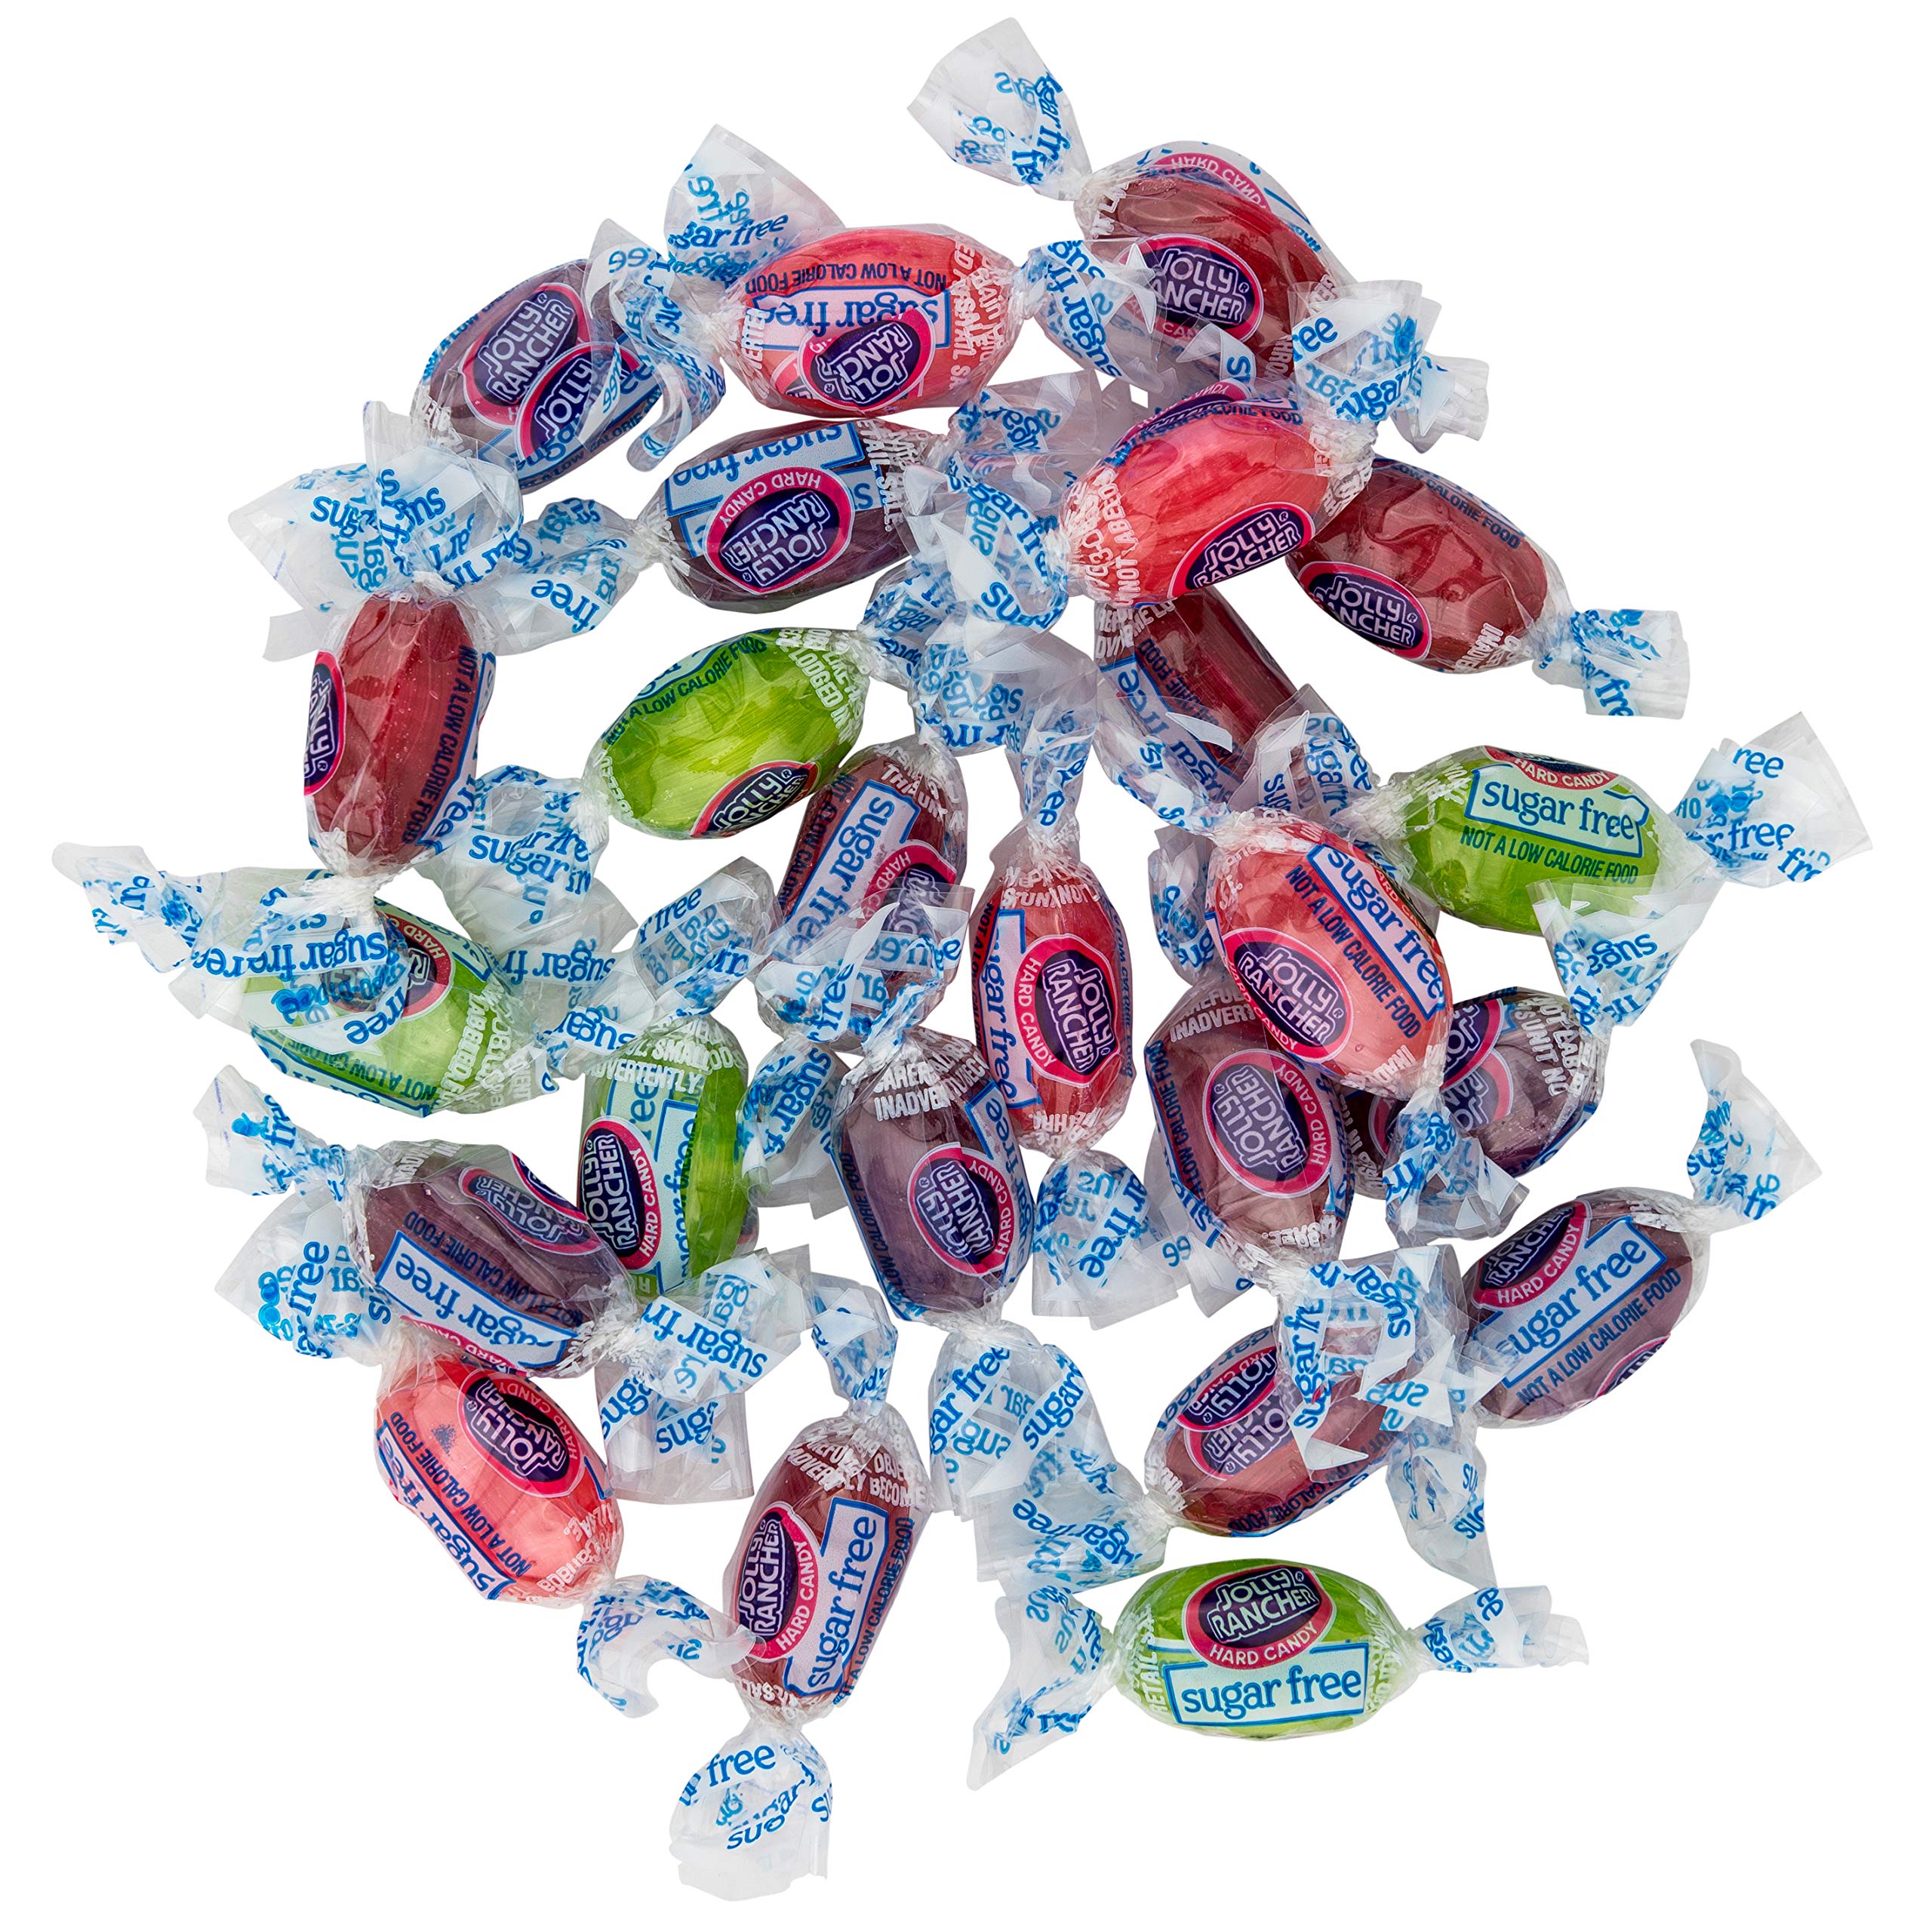 Jolly Ranchr "Sugar Free" Hard Candy - Delicious 7.5 oz Bag of Assorted Fruit Flavors - Packed by Snackadilly